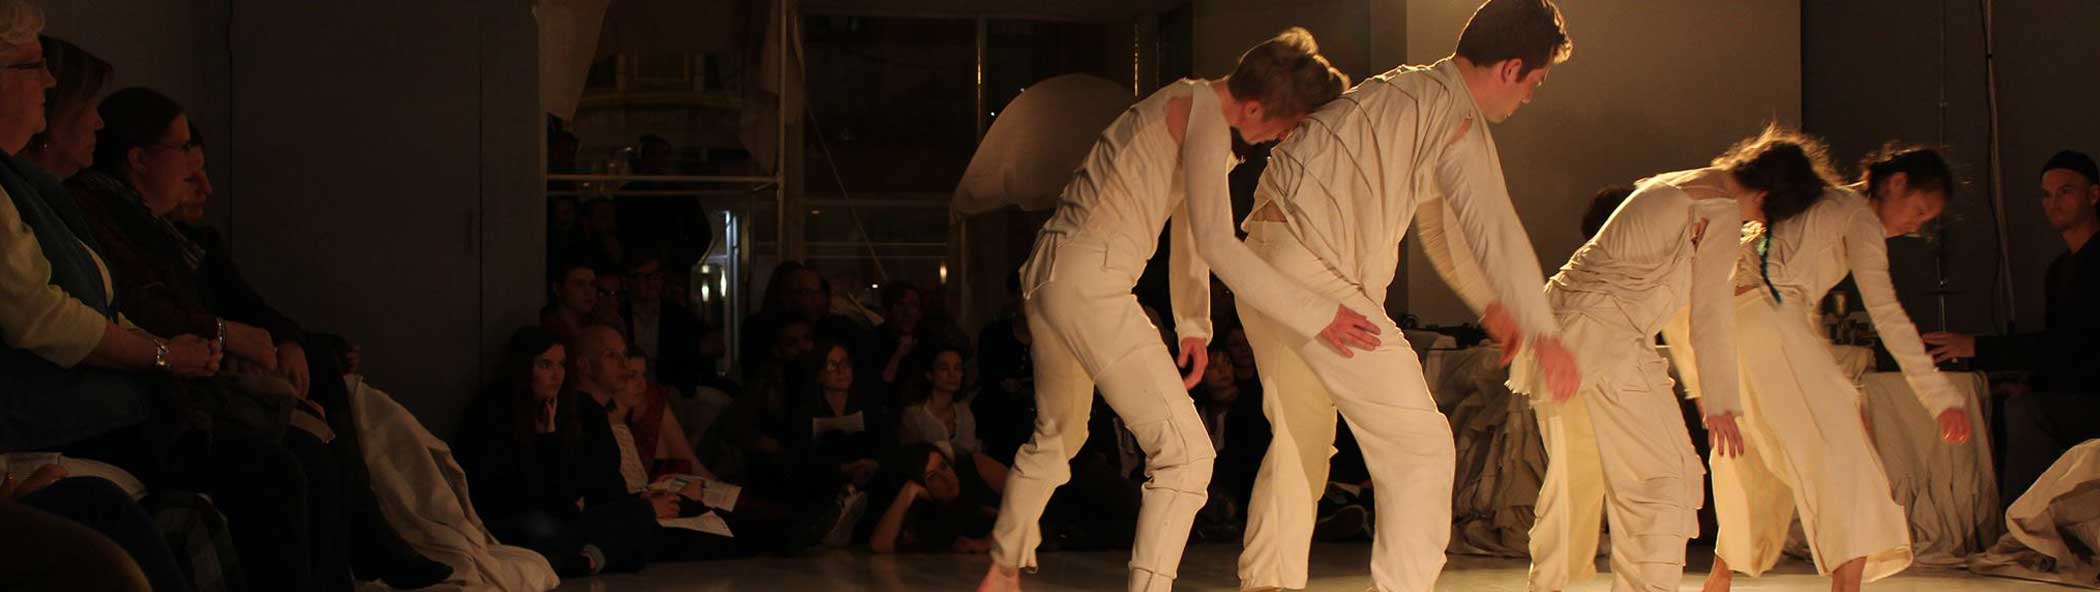 Four dancers, dressed in white long sleeve shirts and long pants, walk in a line, each of them partnered up with the partner in the back resting their forehead on their partner’s back. The dancers perform on a white Marley stage surround by seated audience members on all sides.